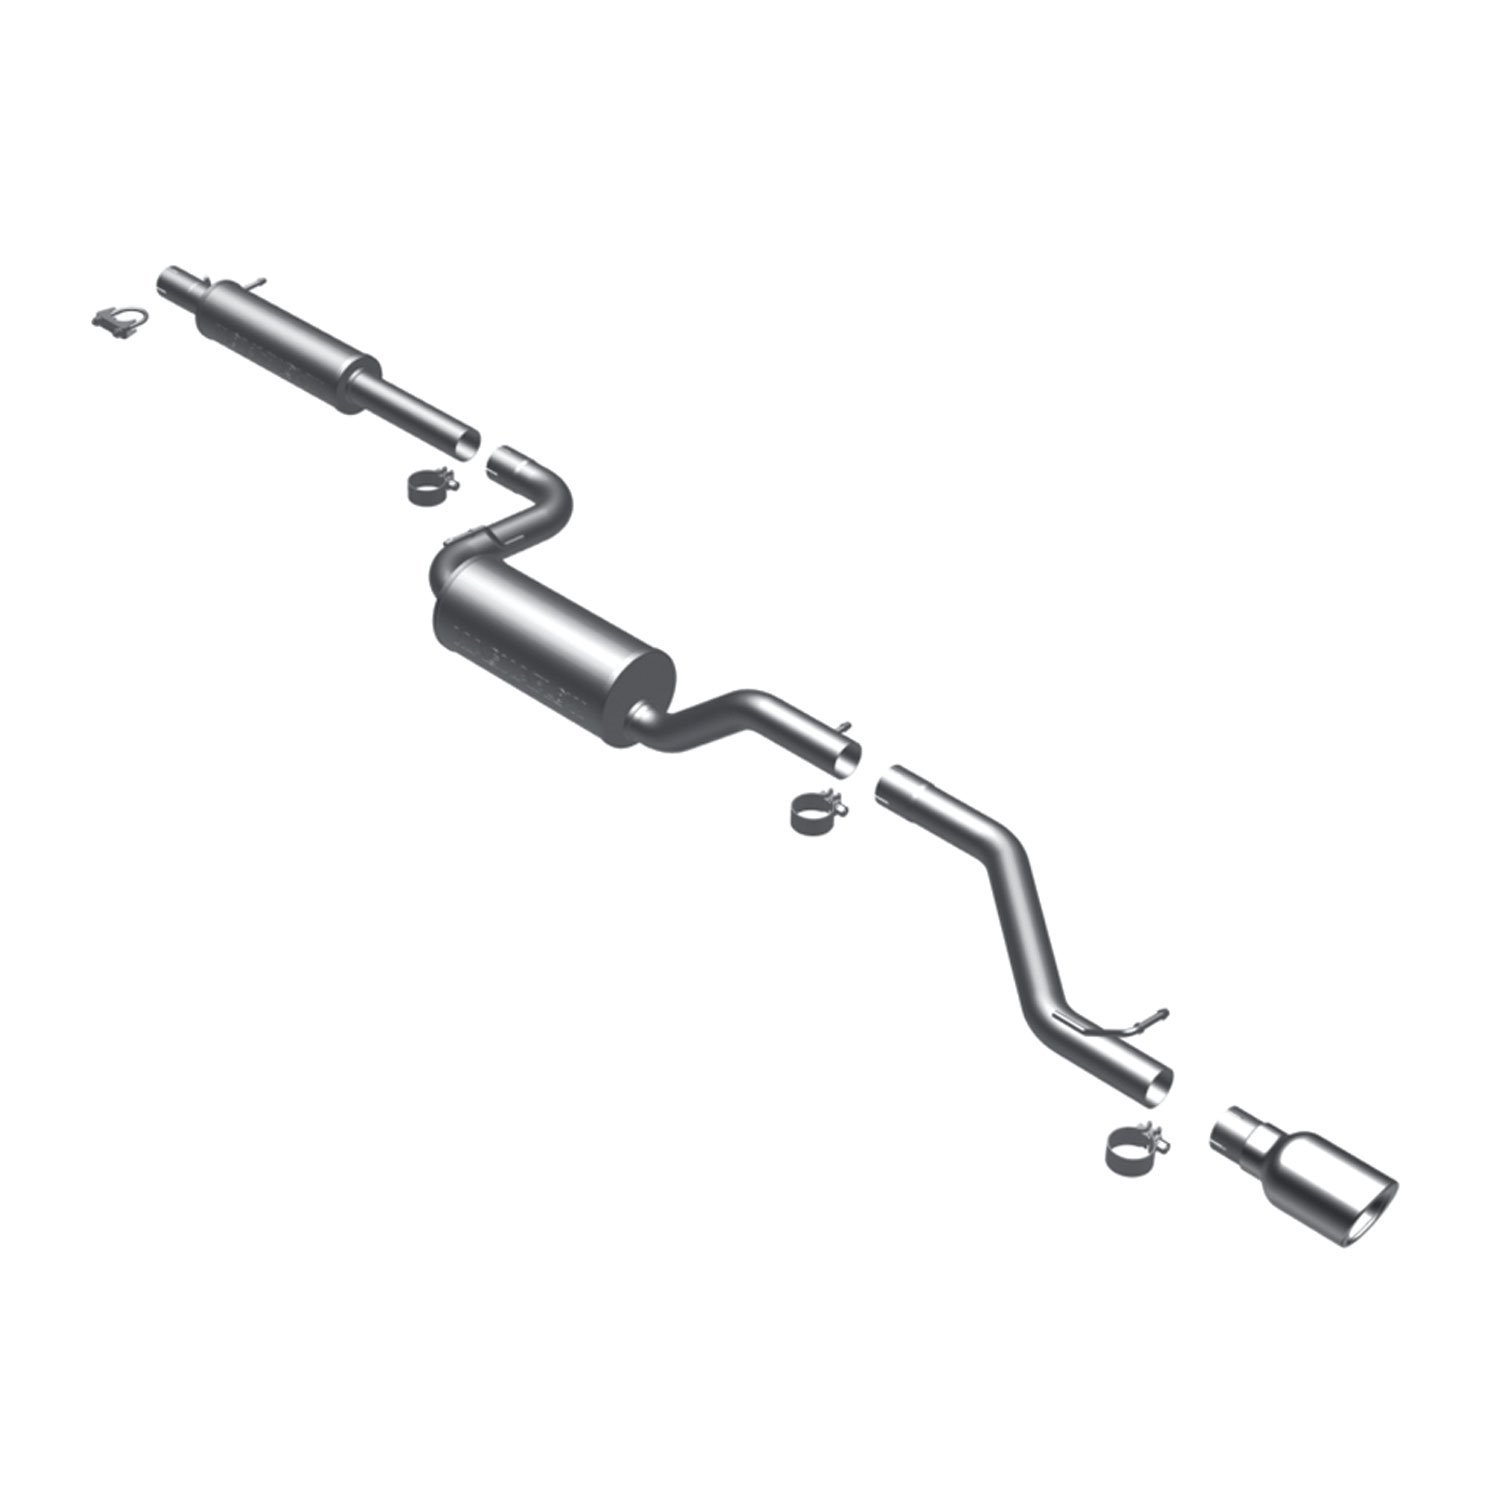 Street Series Cat-Back Exhaust System 2007-09 Mazda 3 2.0L/2.3L L4 (Excludes Turbo)